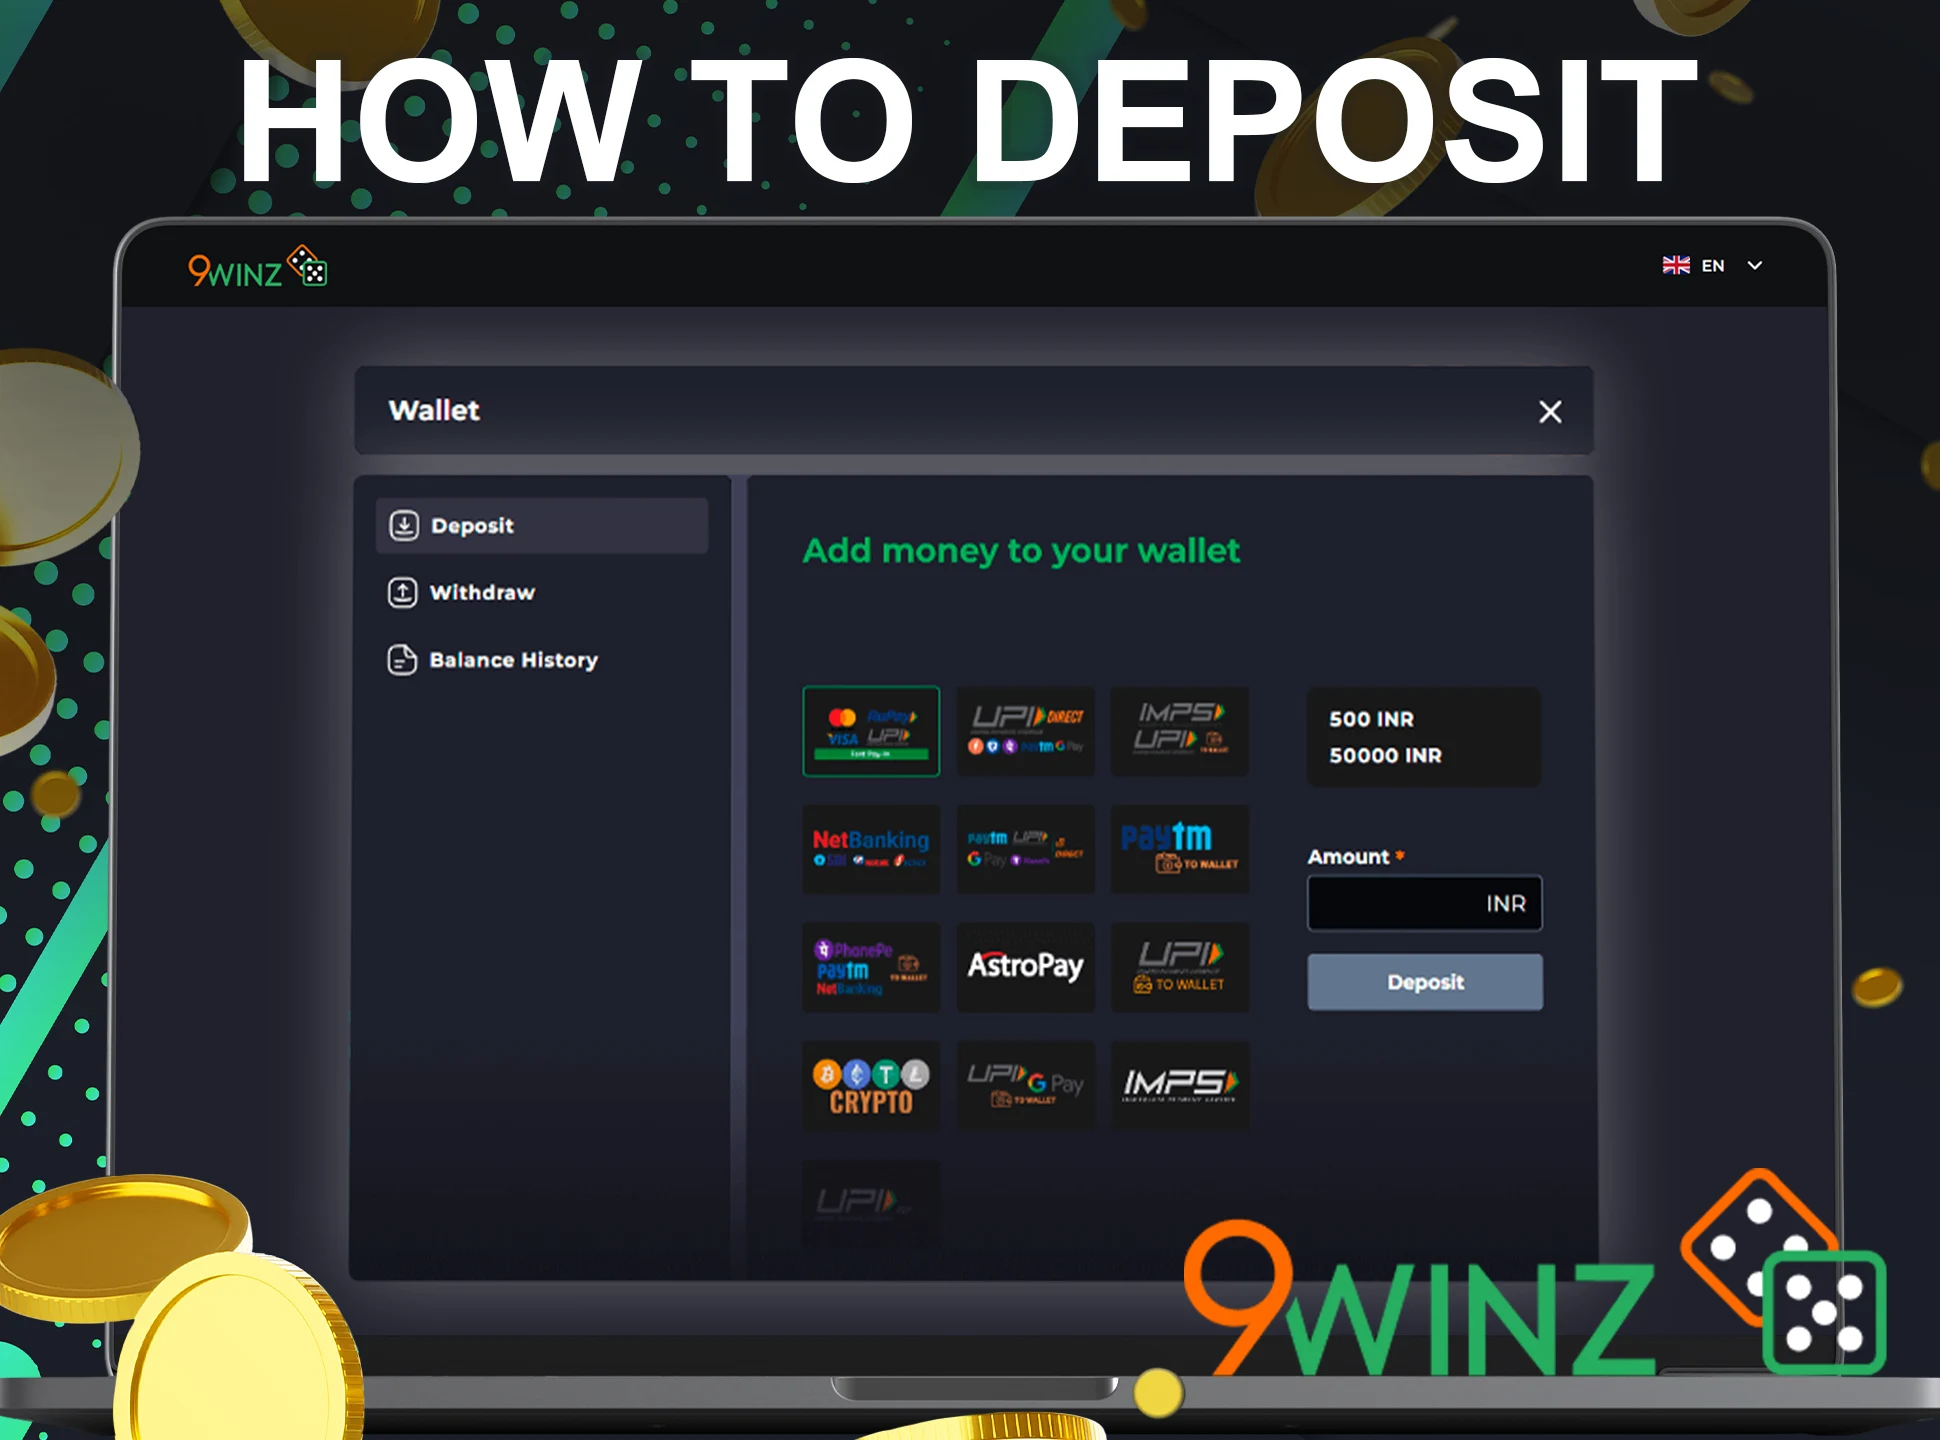 Players can deposit to their 9winz account in the Deposit section and continue playing with real money.